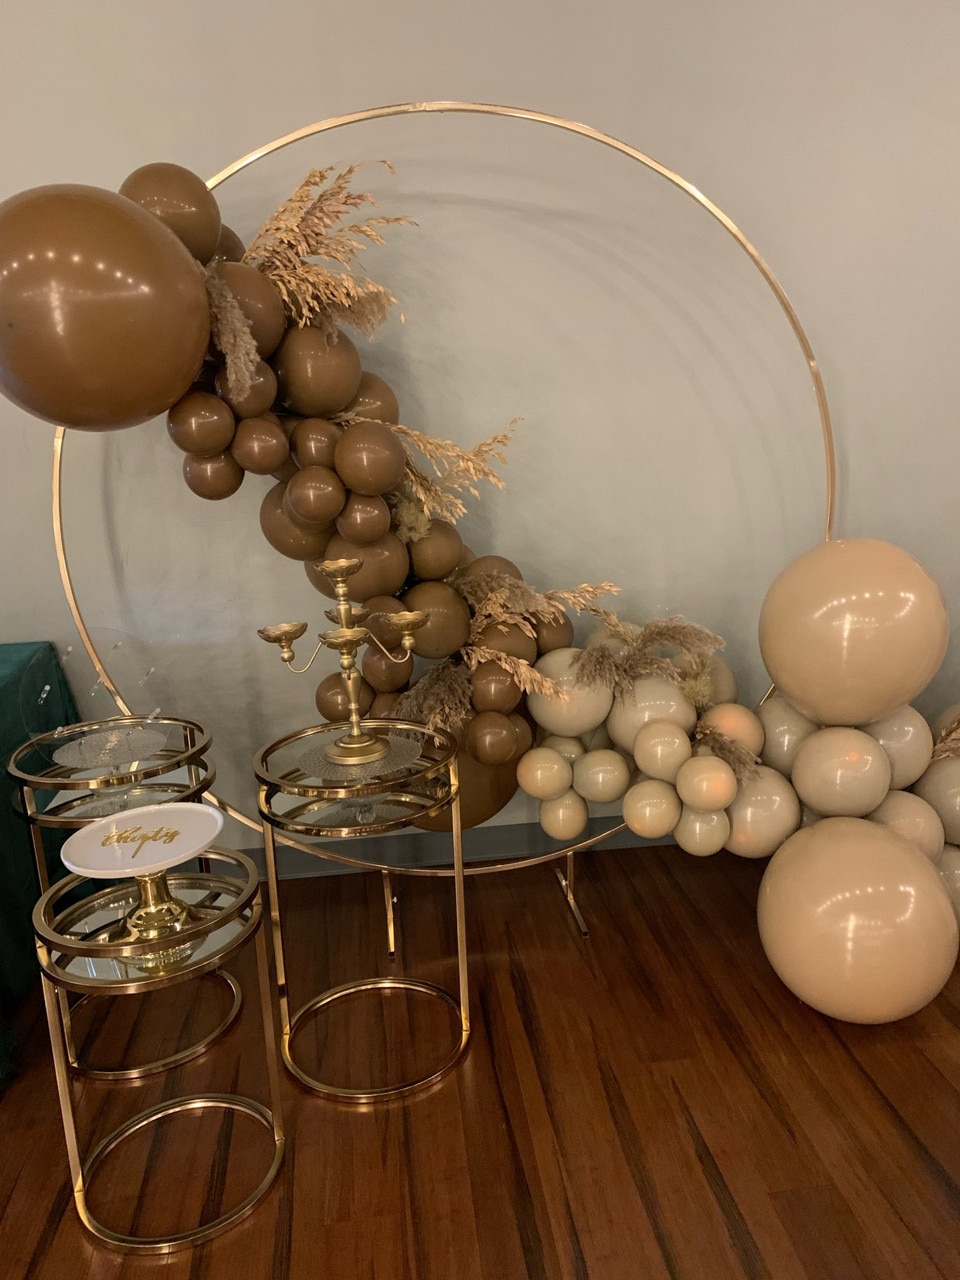 how to make flower ball wedding decorations?